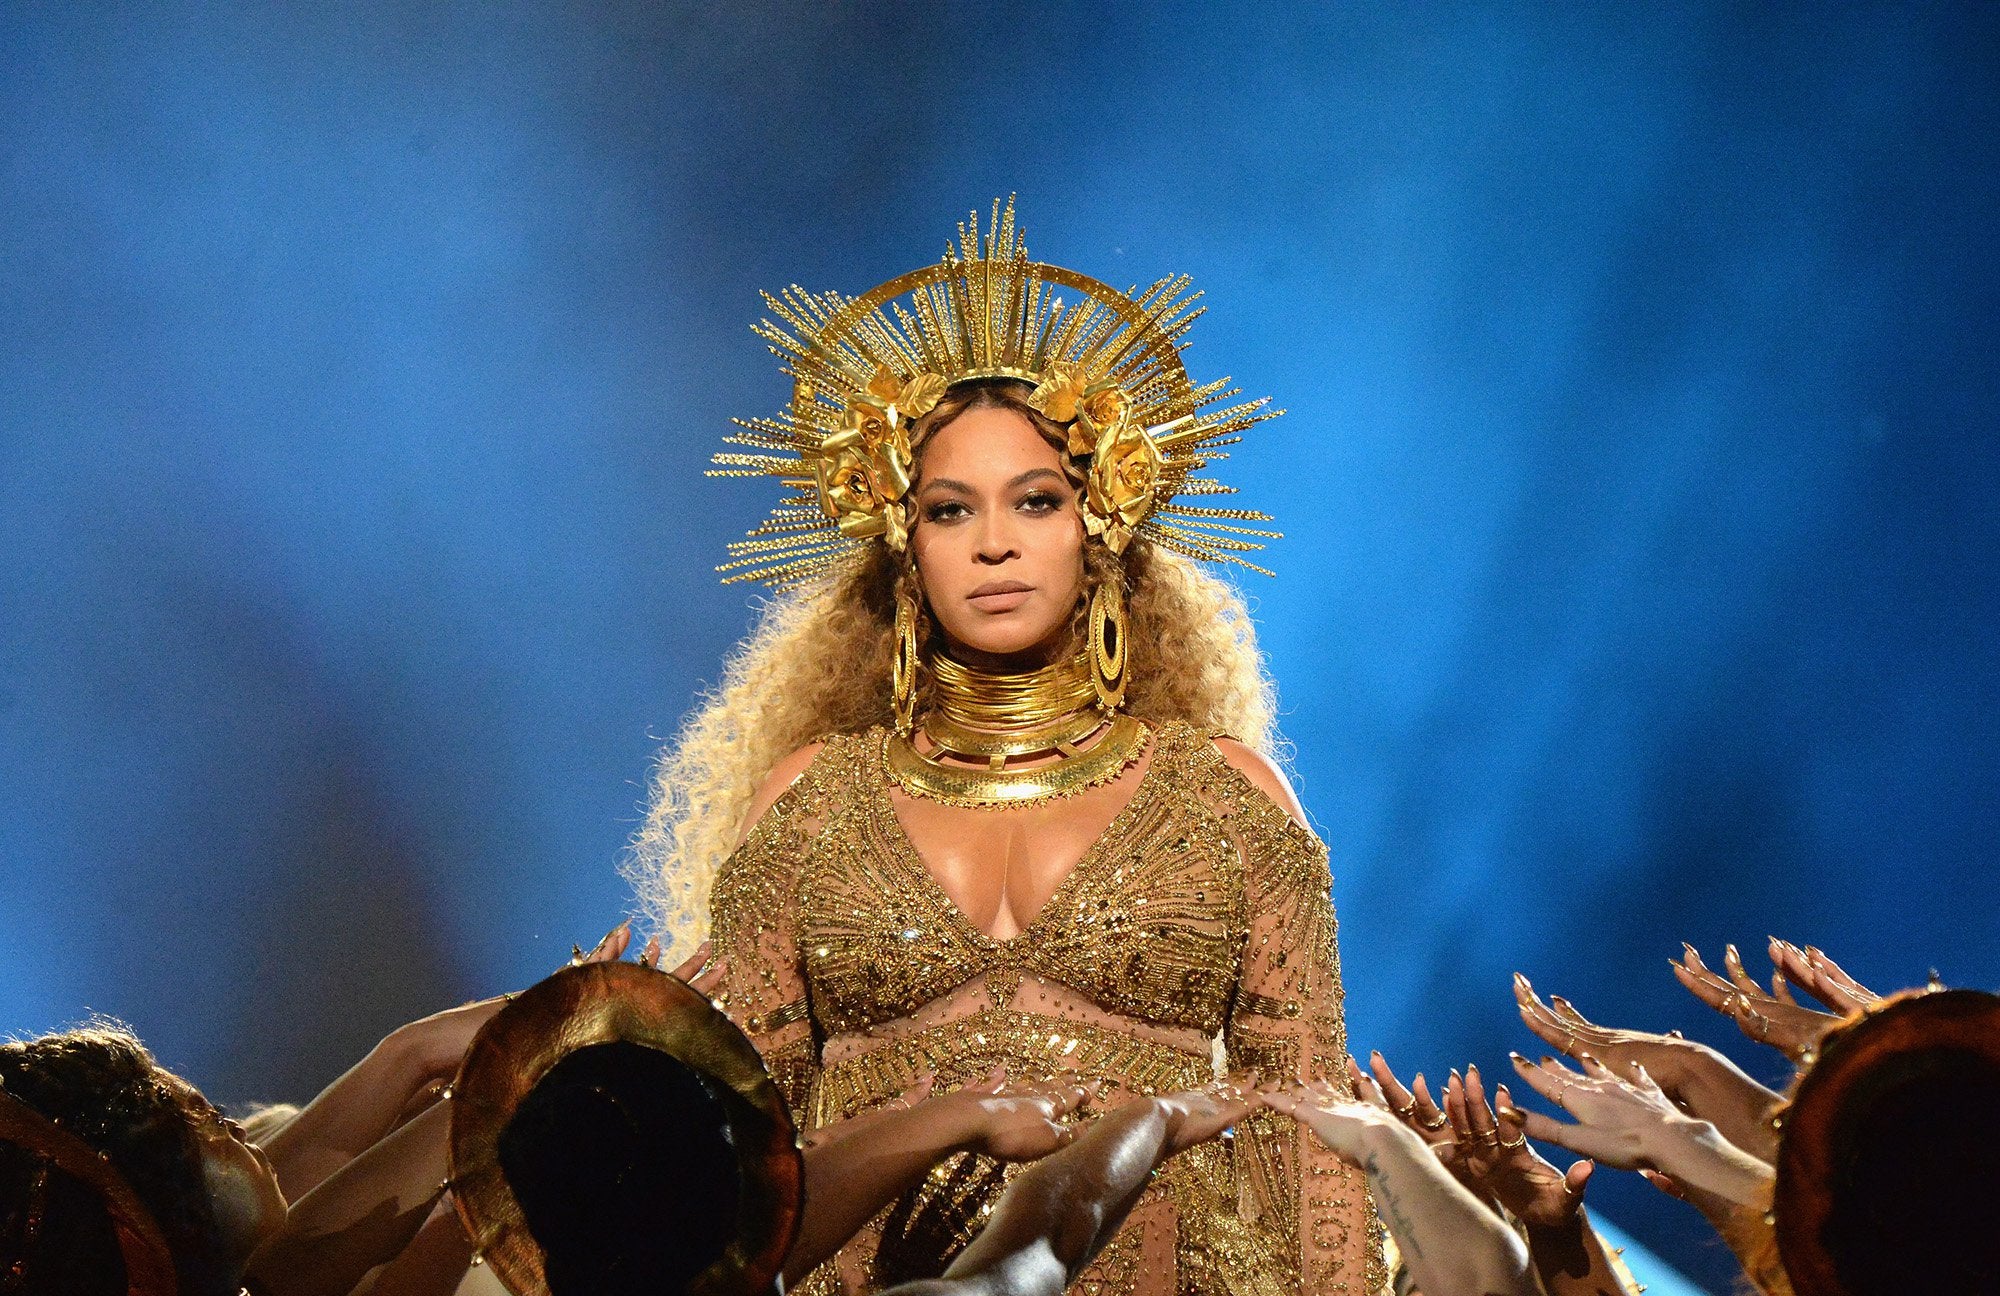 Beyoncé Comes Through For Young Women, Launches New Scholarship Program
